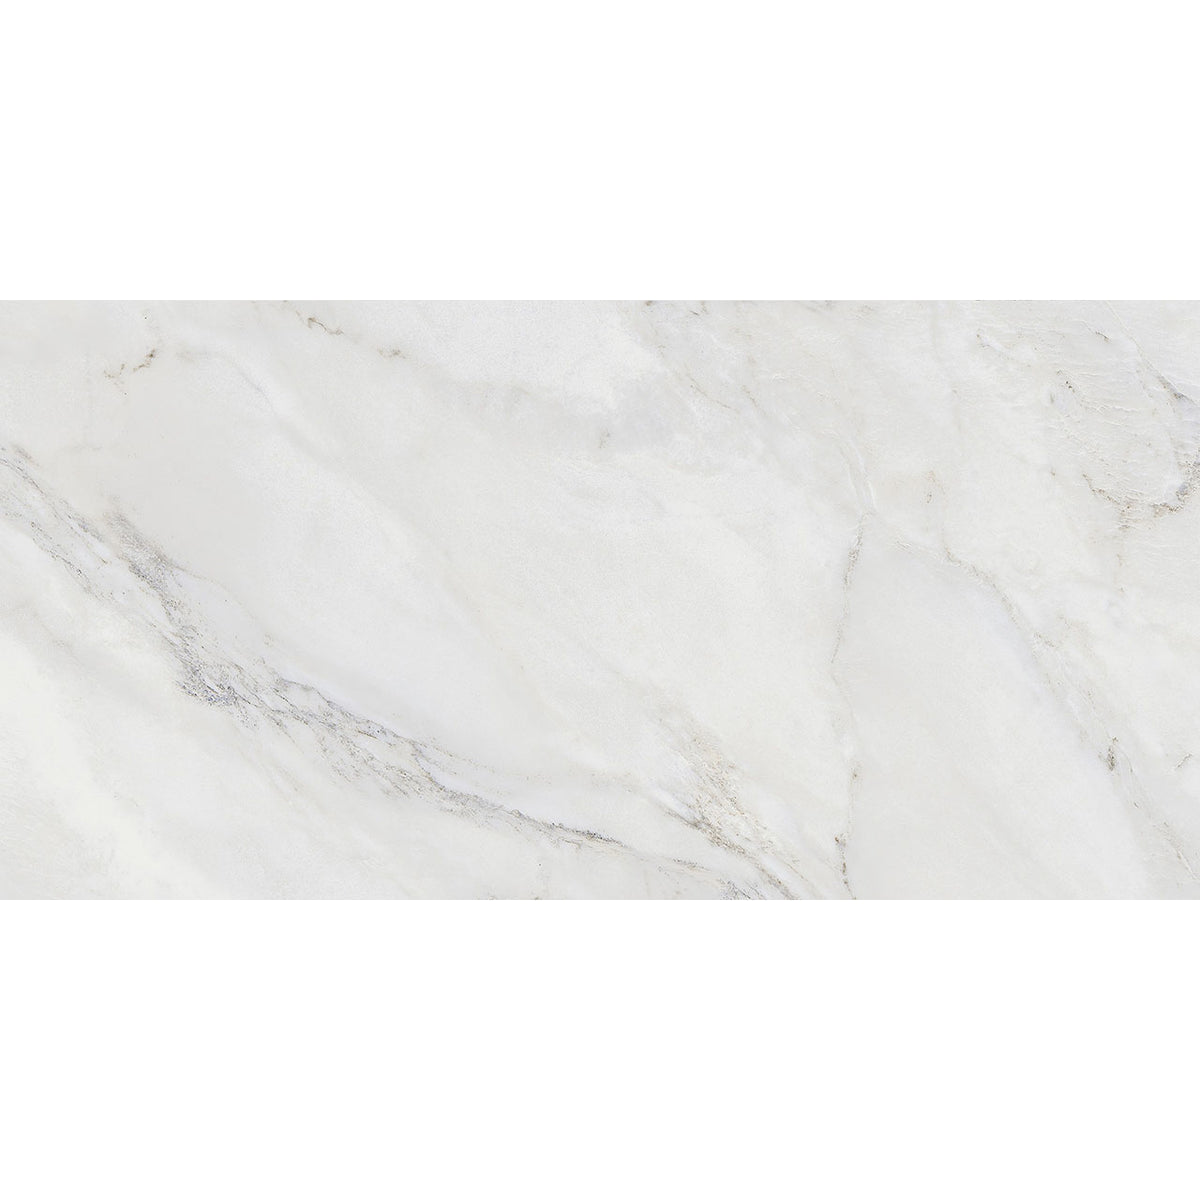 Floors 2000 - Anderson 12 in. x 24 in. Porcelain Tile - White Polished